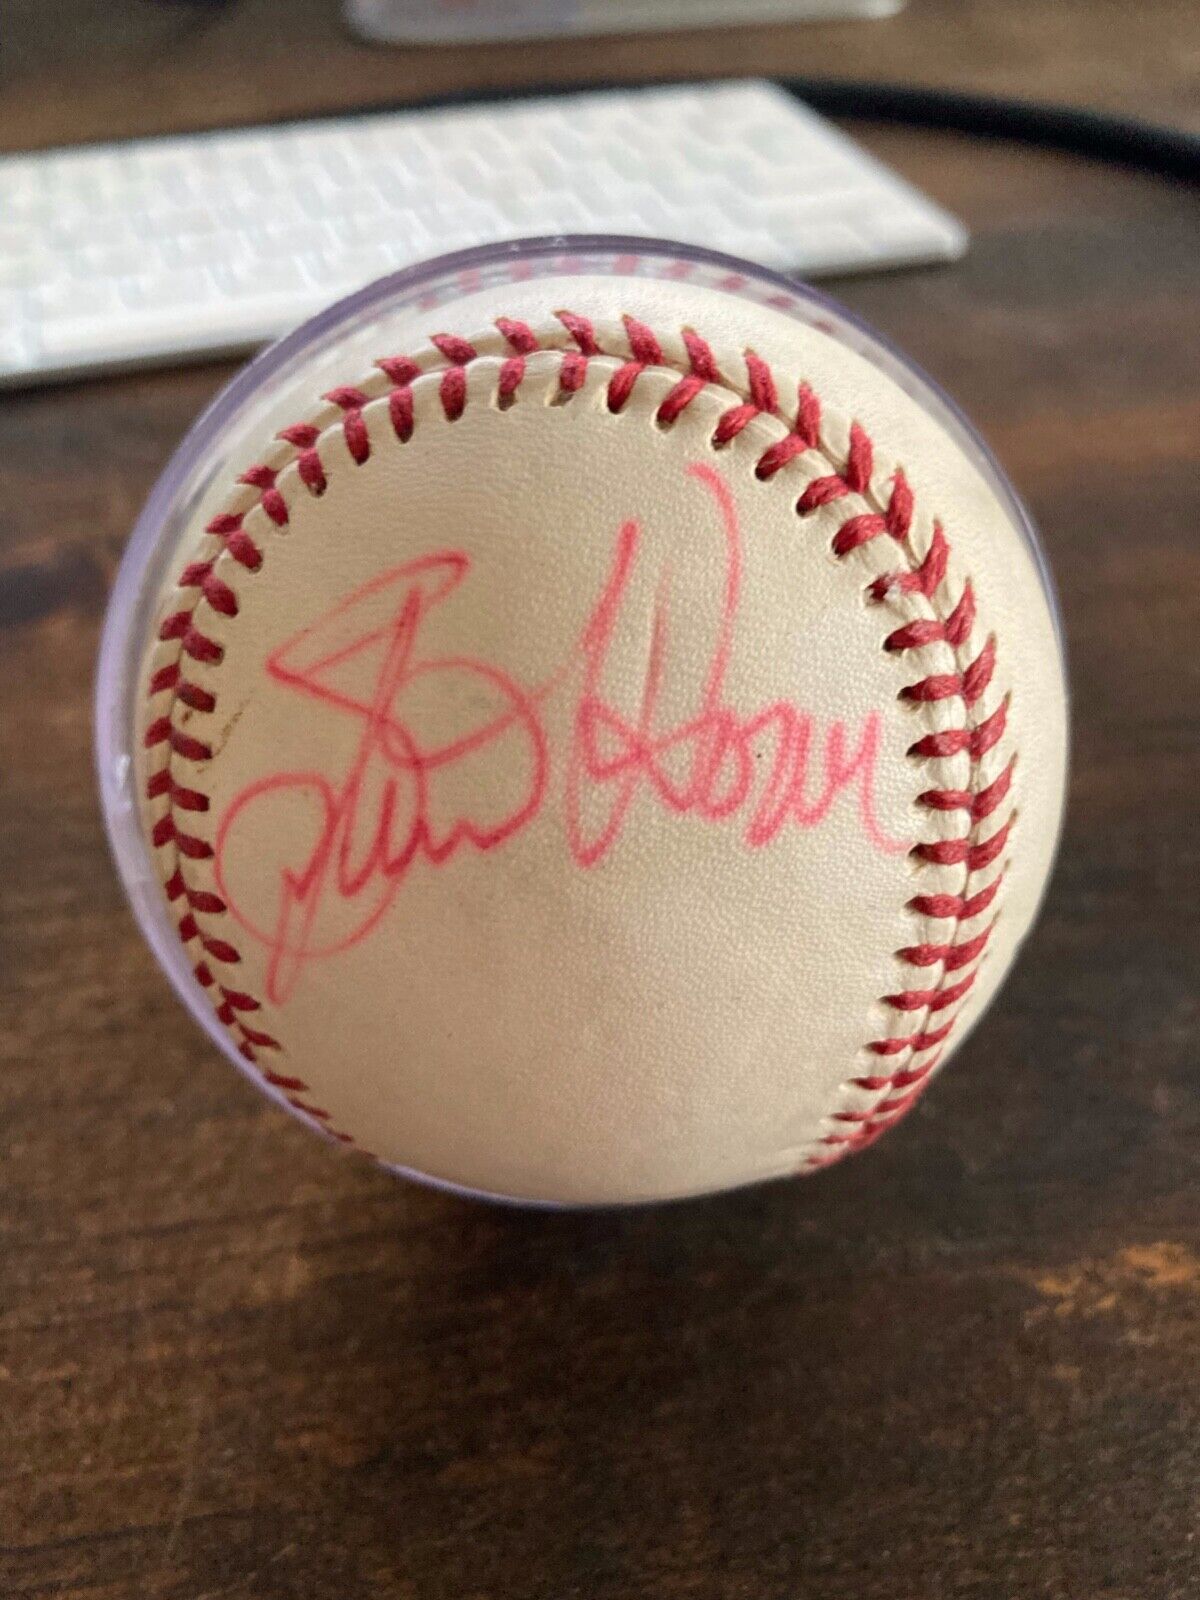 Steve Howe Autographed Baseball Pink Ink and More Great condition 